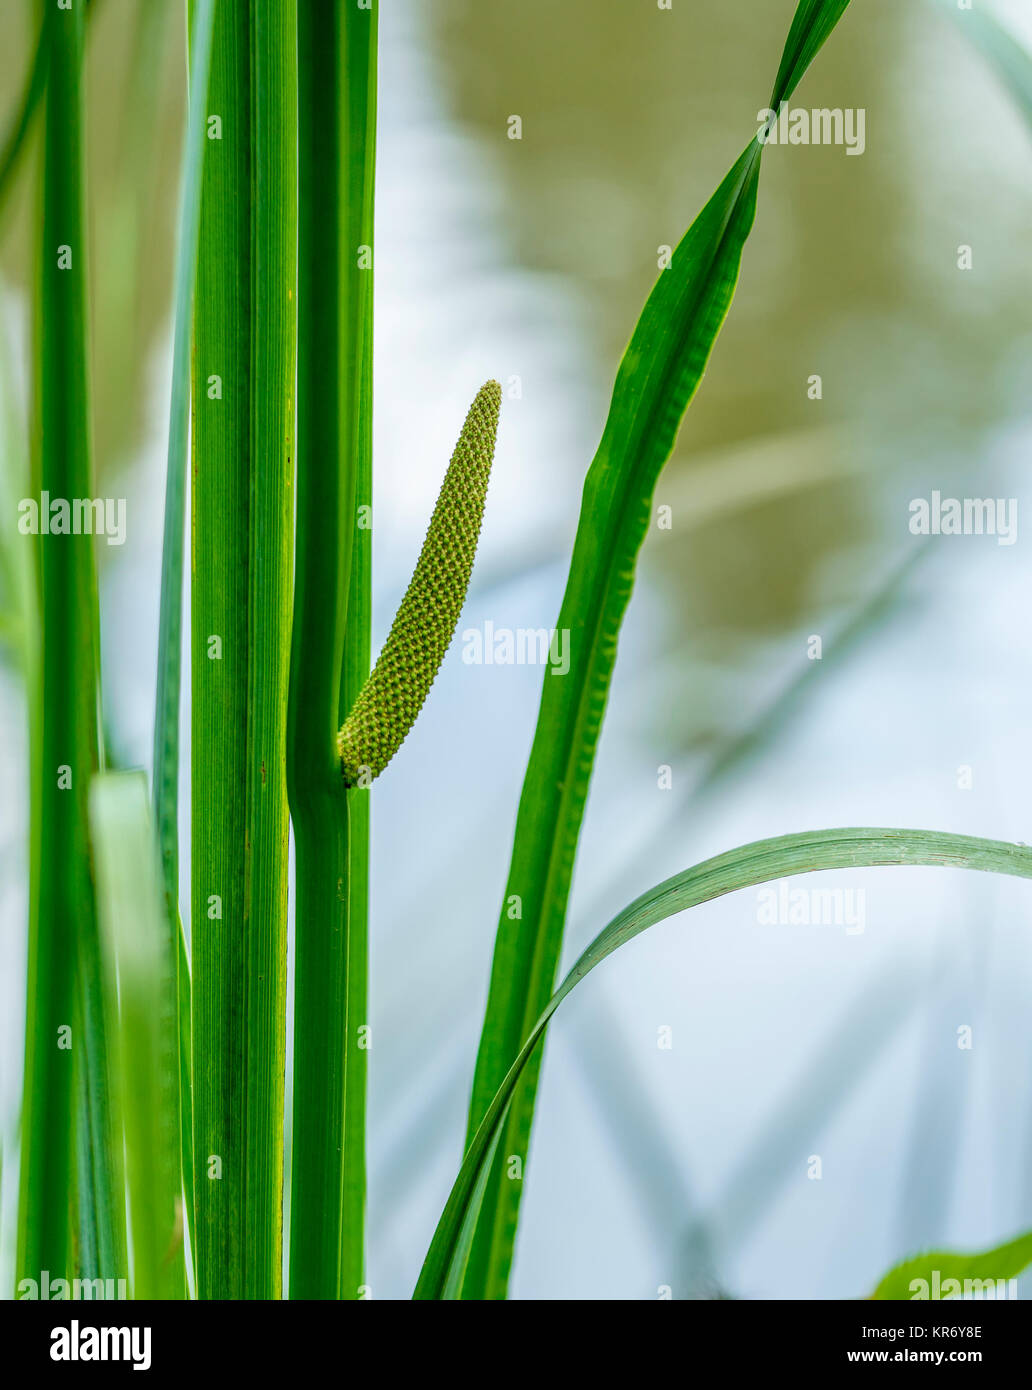 outdoor scenery showing some green riverine vegetation detail at a lake Stock Photo